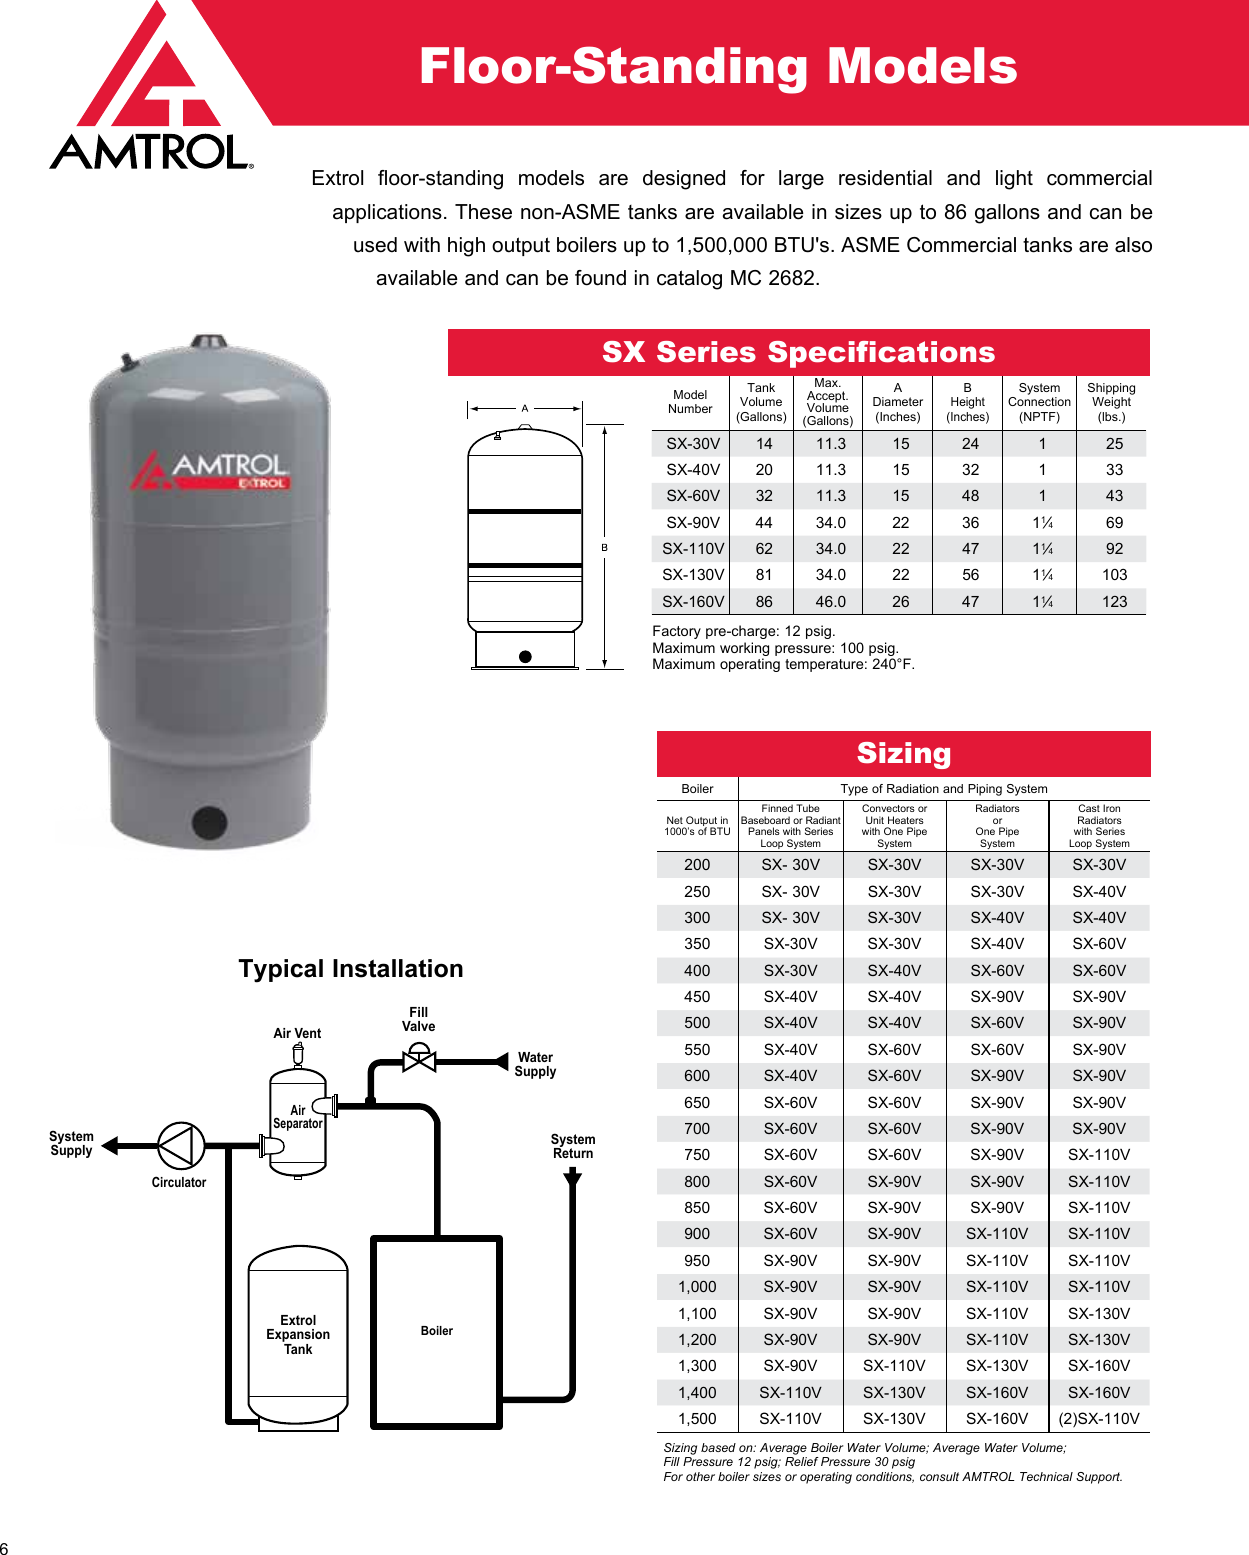 Page 6 of 8 - 551519 1 Amtrol FT-109 Fill-Trol Expansion Tank Brochure